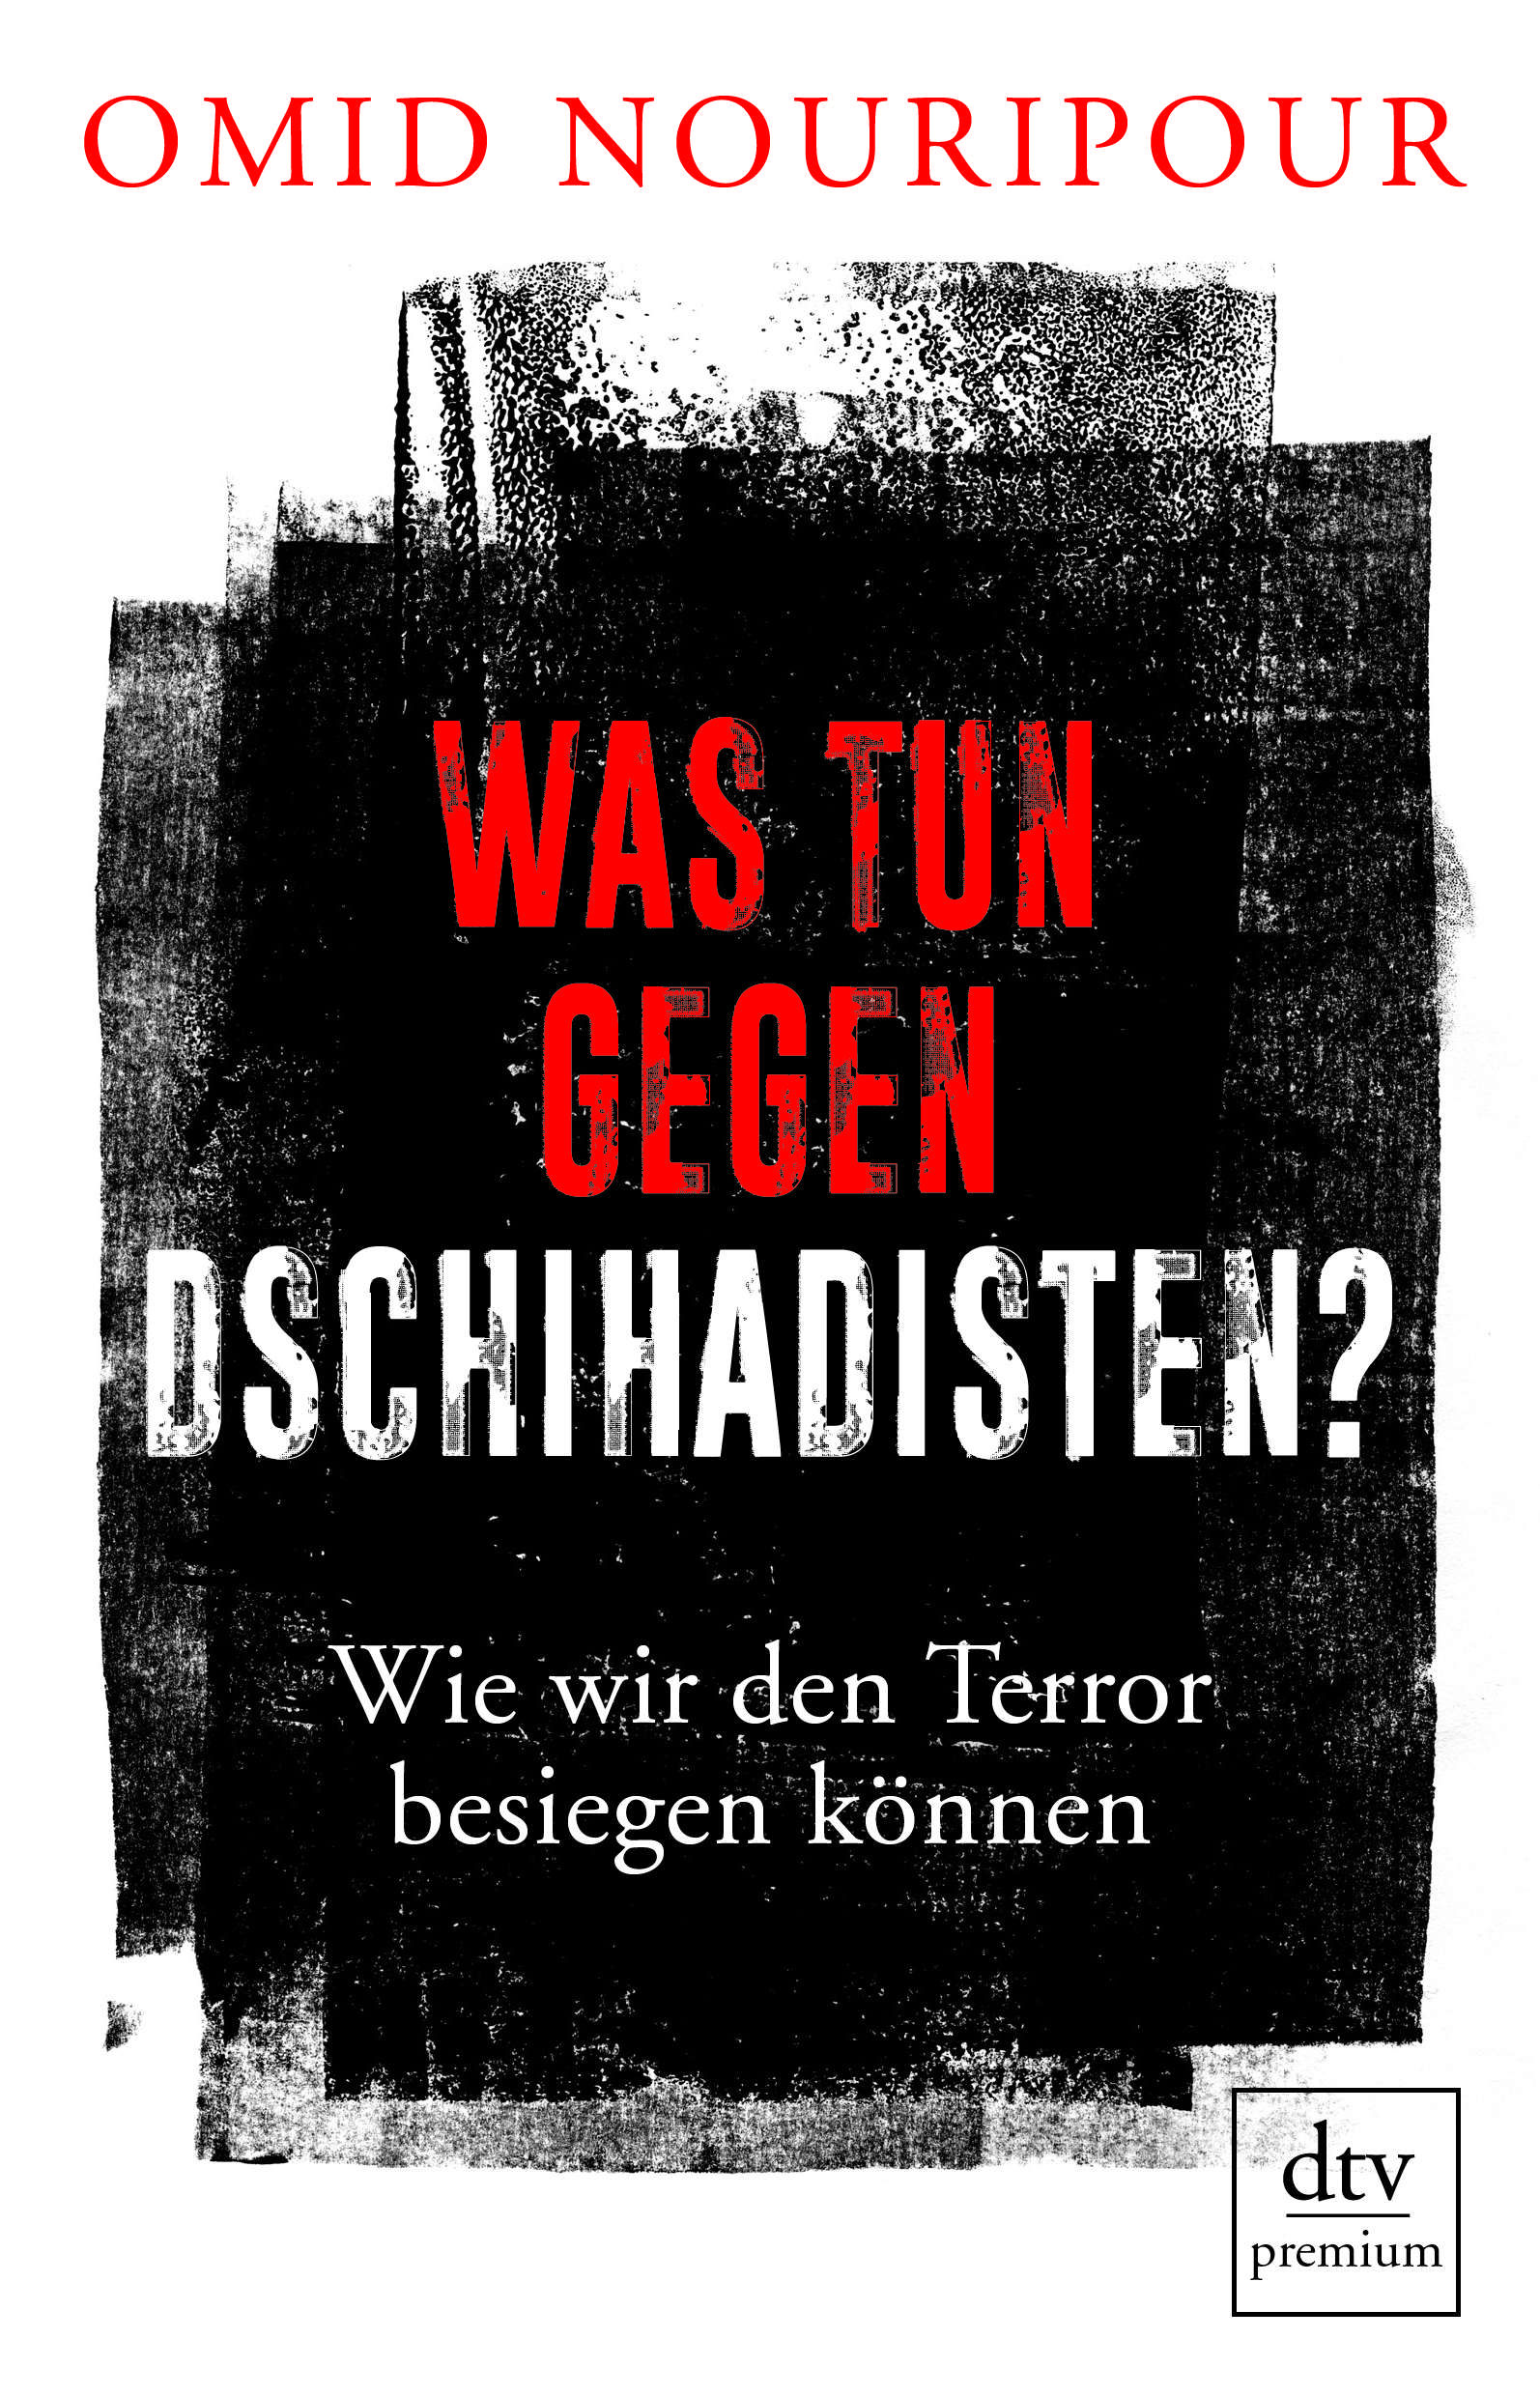 Cover of Omid Nouripour's: "What to Do about Jihadists? A Policy Approach to the War on Terror", German only (published by DTV premium)